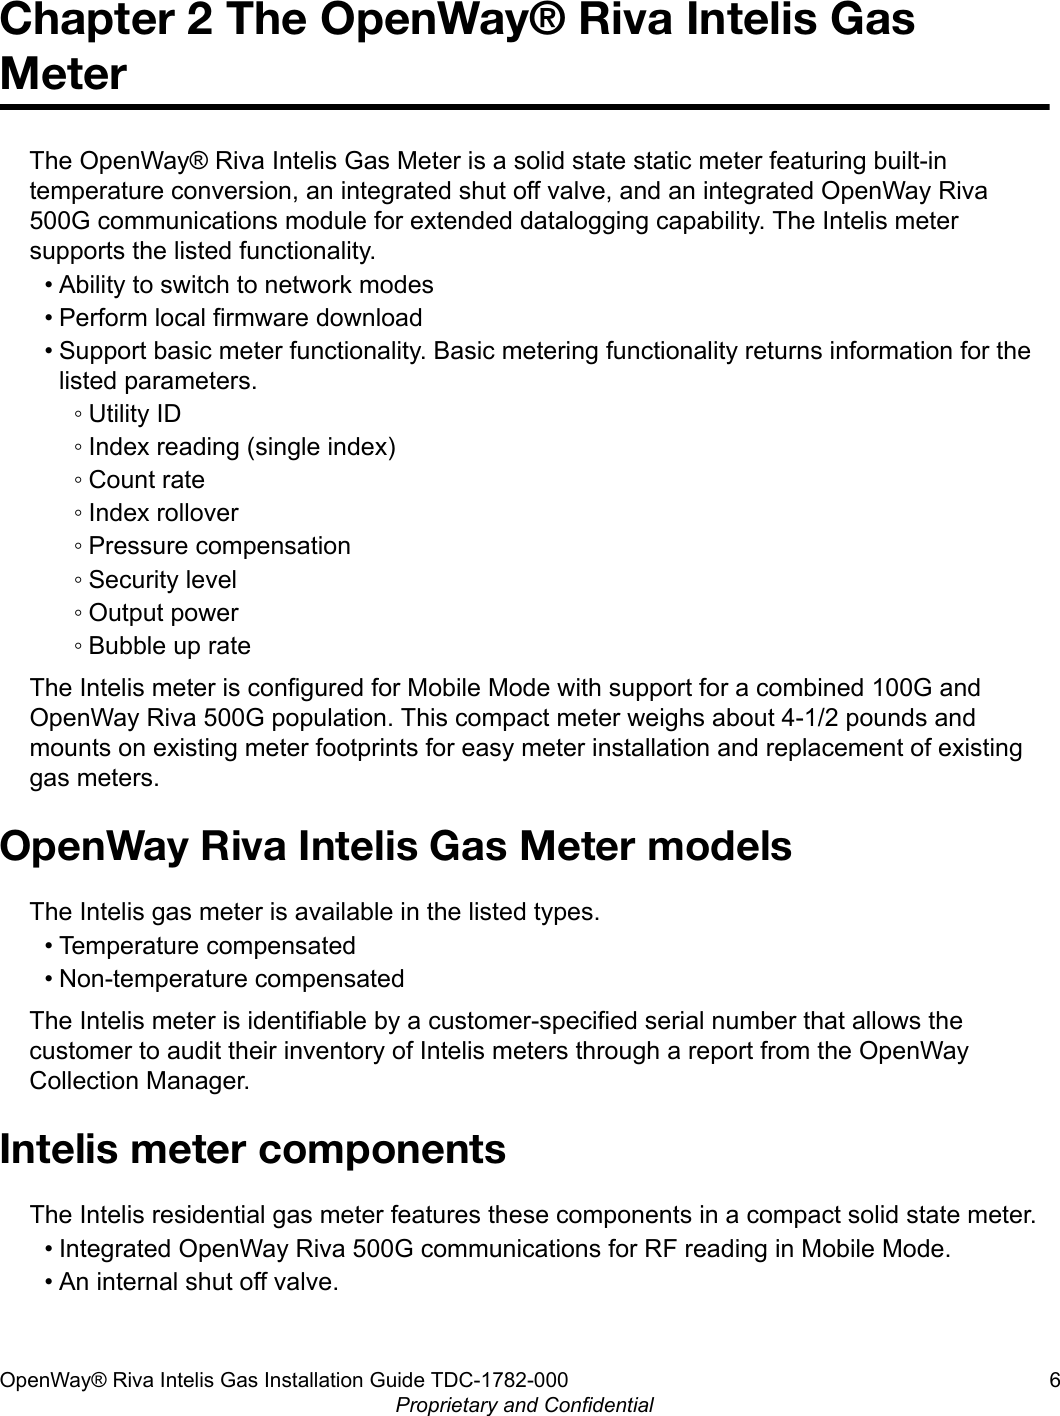 Chapter 2 The OpenWay® Riva Intelis GasMeterThe OpenWay® Riva Intelis Gas Meter is a solid state static meter featuring built-intemperature conversion, an integrated shut off valve, and an integrated OpenWay Riva500G communications module for extended datalogging capability. The Intelis metersupports the listed functionality.• Ability to switch to network modes• Perform local firmware download• Support basic meter functionality. Basic metering functionality returns information for thelisted parameters.◦ Utility ID◦ Index reading (single index)◦ Count rate◦ Index rollover◦ Pressure compensation◦ Security level◦ Output power◦ Bubble up rateThe Intelis meter is configured for Mobile Mode with support for a combined 100G andOpenWay Riva 500G population. This compact meter weighs about 4-1/2 pounds andmounts on existing meter footprints for easy meter installation and replacement of existinggas meters.OpenWay Riva Intelis Gas Meter modelsThe Intelis gas meter is available in the listed types.• Temperature compensated• Non-temperature compensatedThe Intelis meter is identifiable by a customer-specified serial number that allows thecustomer to audit their inventory of Intelis meters through a report from the OpenWayCollection Manager.Intelis meter componentsThe Intelis residential gas meter features these components in a compact solid state meter.• Integrated OpenWay Riva 500G communications for RF reading in Mobile Mode.• An internal shut off valve.OpenWay® Riva Intelis Gas Installation Guide TDC-1782-000 6Proprietary and Confidential